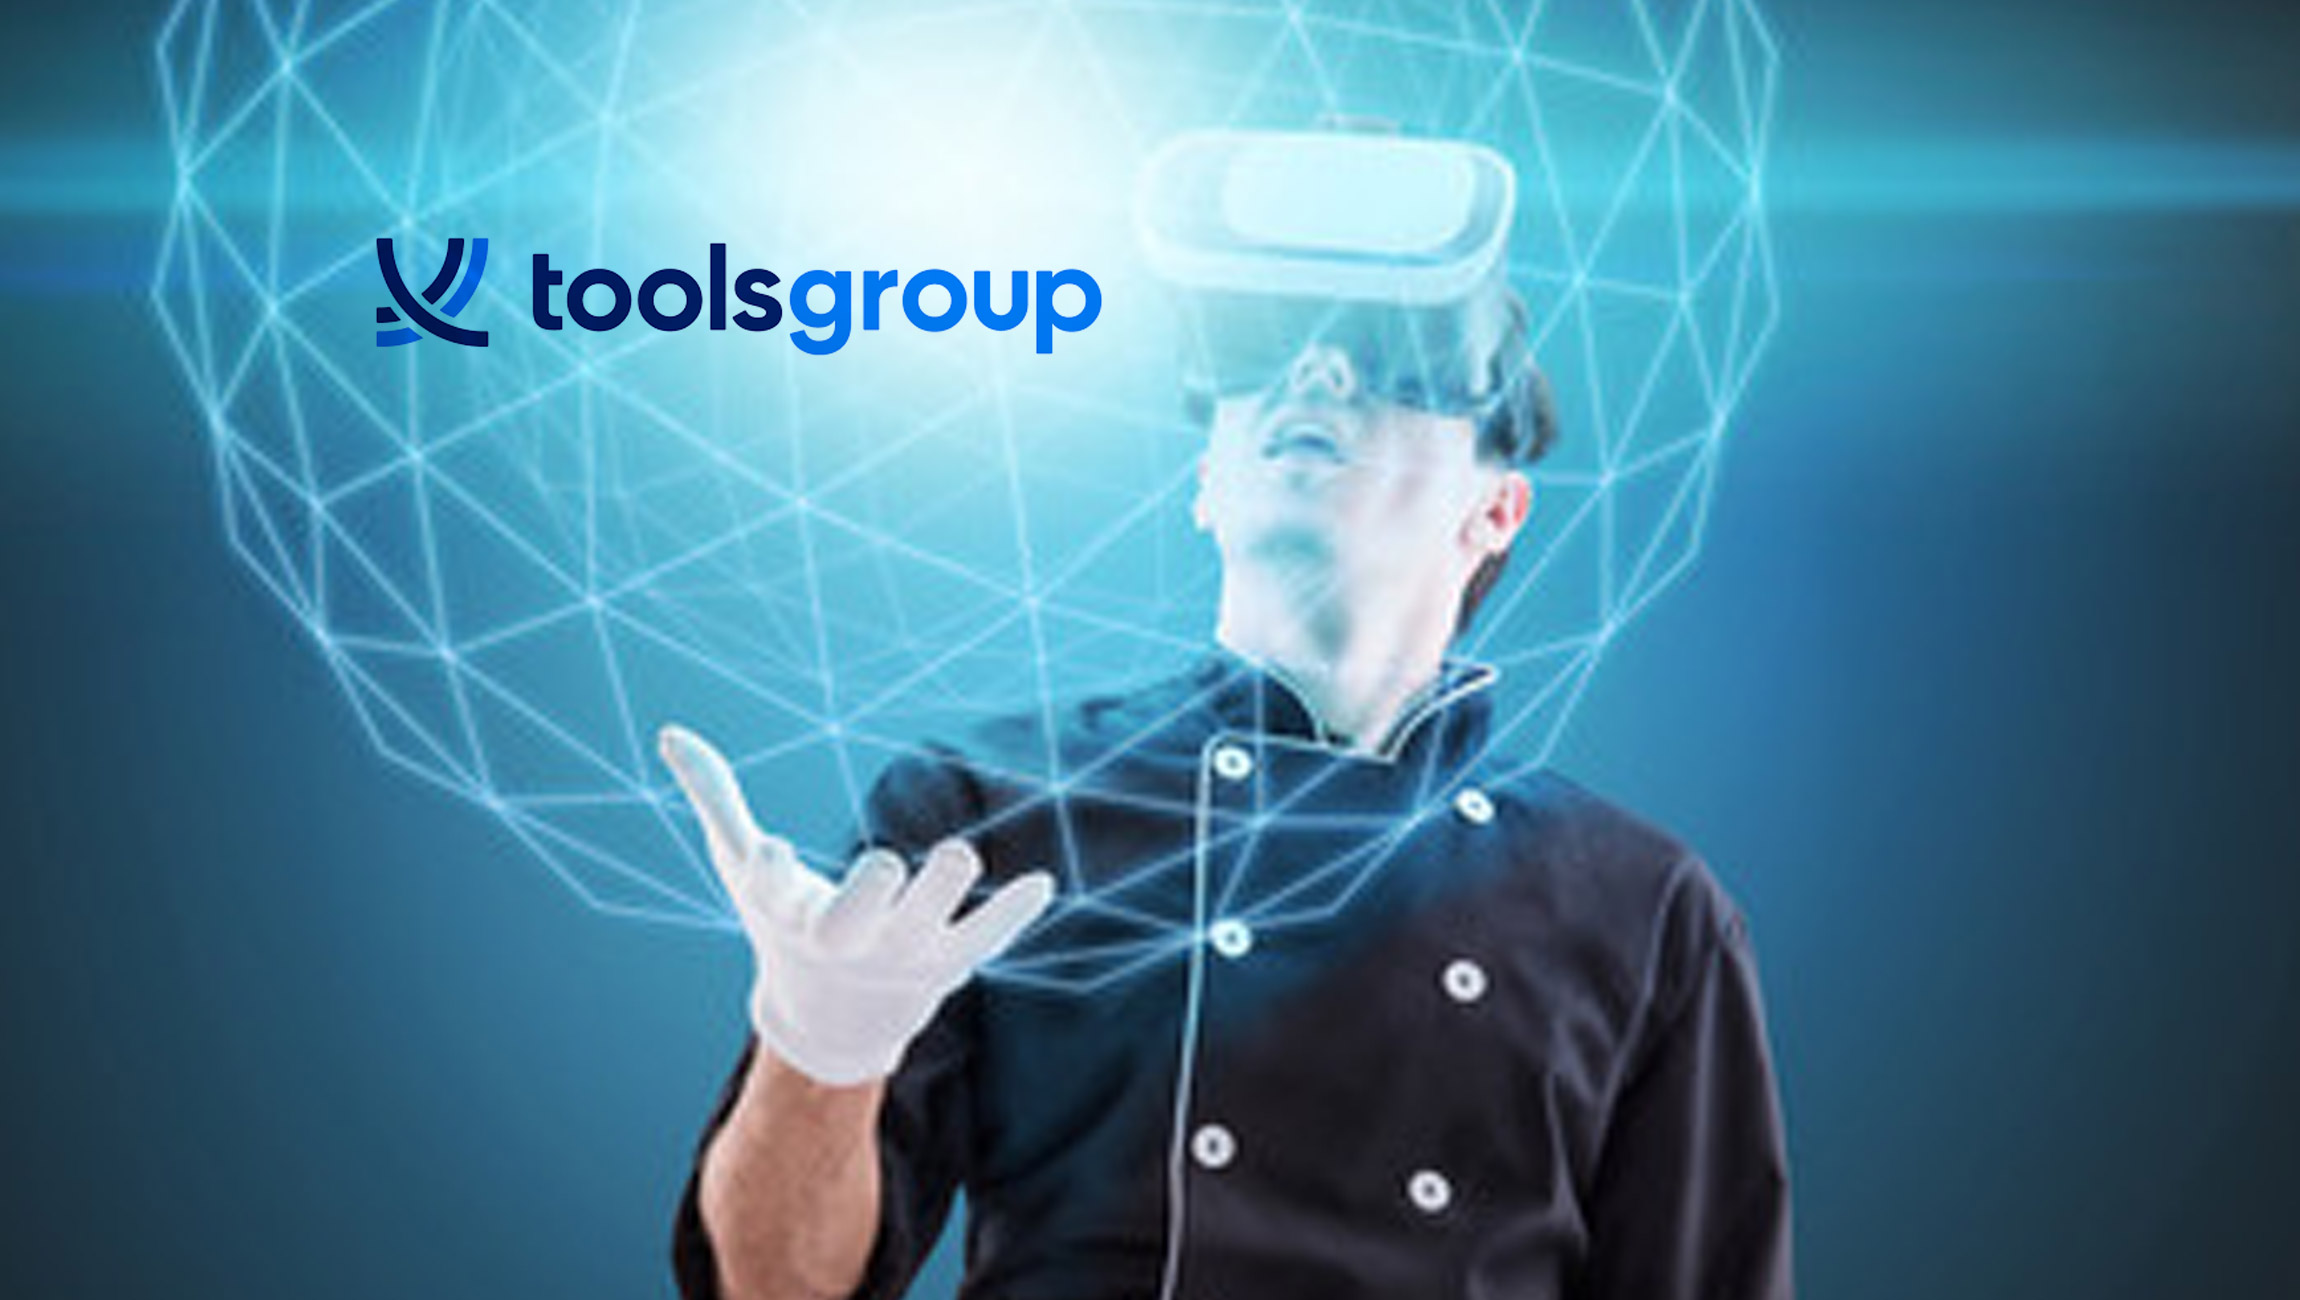 Entertainment Retail Industries Selects ToolsGroup to Improve Supply Chain Agility